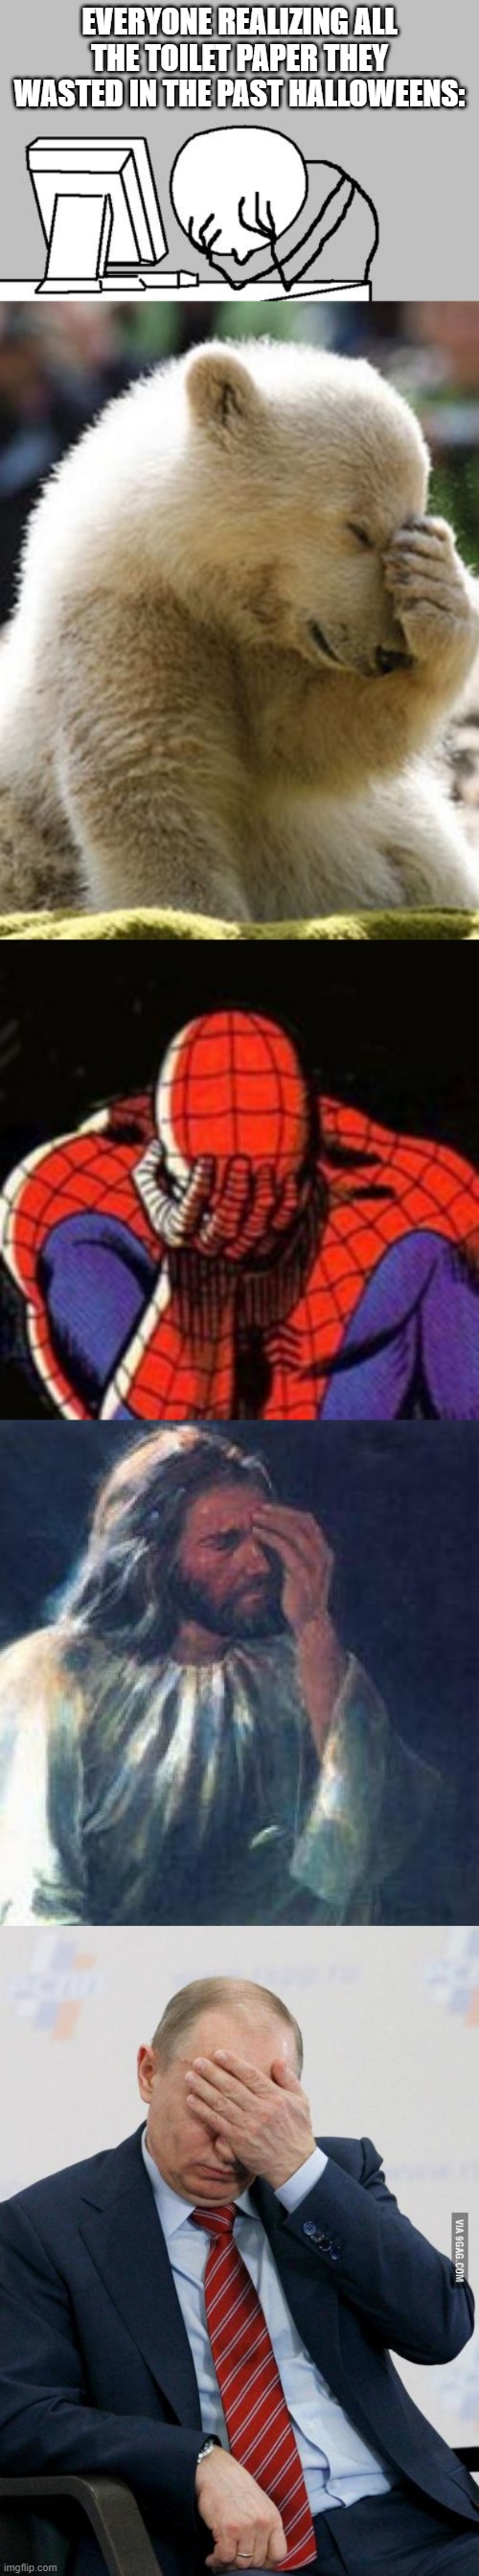 EVERYONE REALIZING ALL THE TOILET PAPER THEY WASTED IN THE PAST HALLOWEENS: | image tagged in memes,sad spiderman,computer guy facepalm,facepalm bear,jesus facepalm,putin facepalm | made w/ Imgflip meme maker